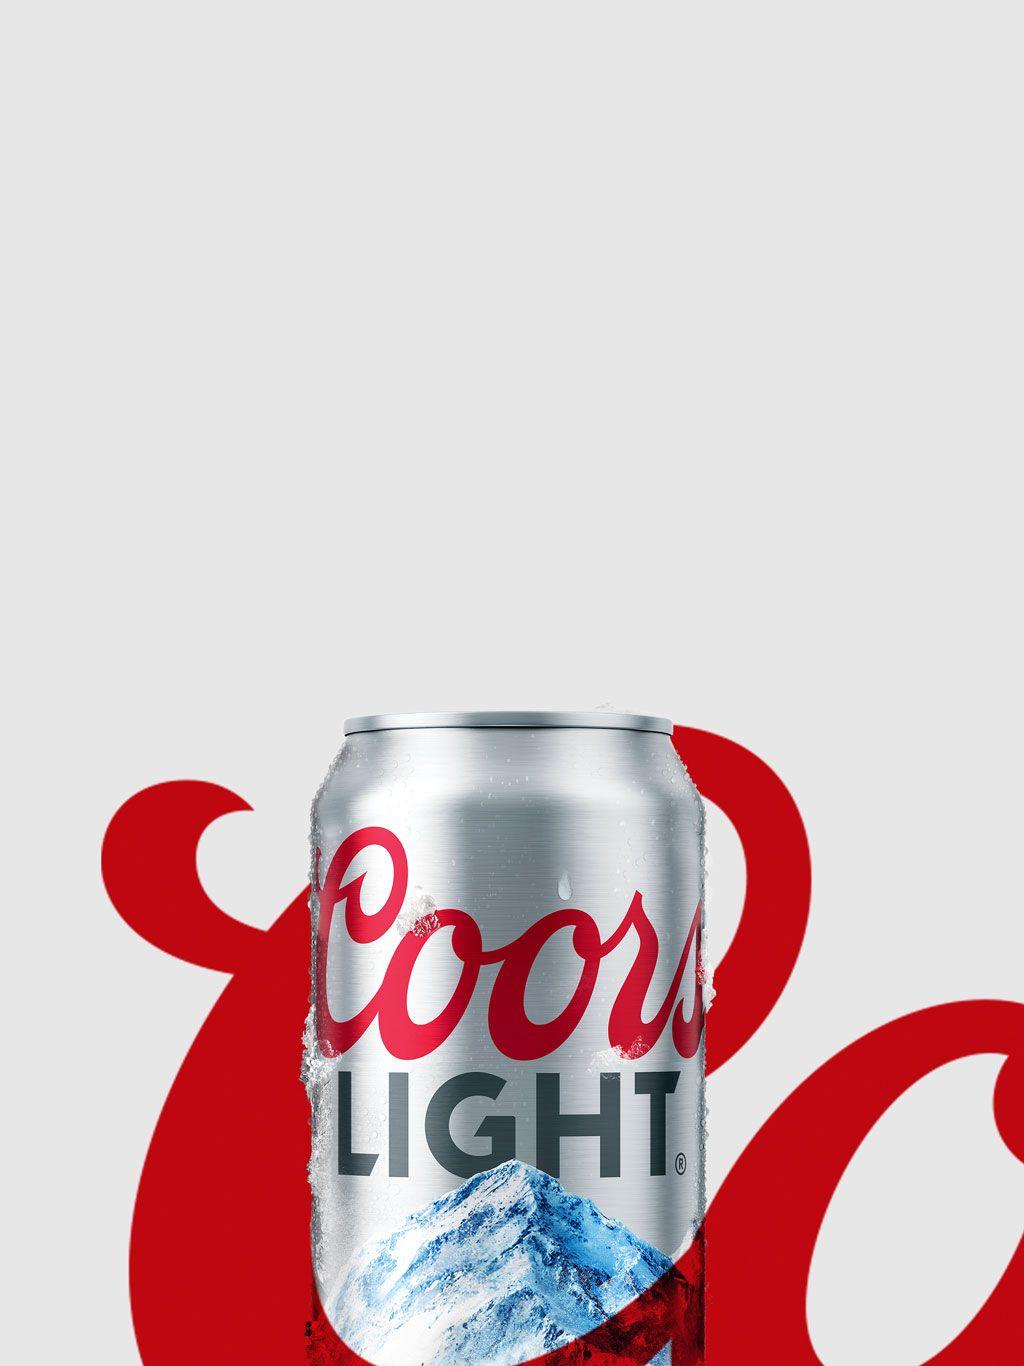 Coors Light Can Logo - Light Beer Born In The Rockies 1978 | Coors Light